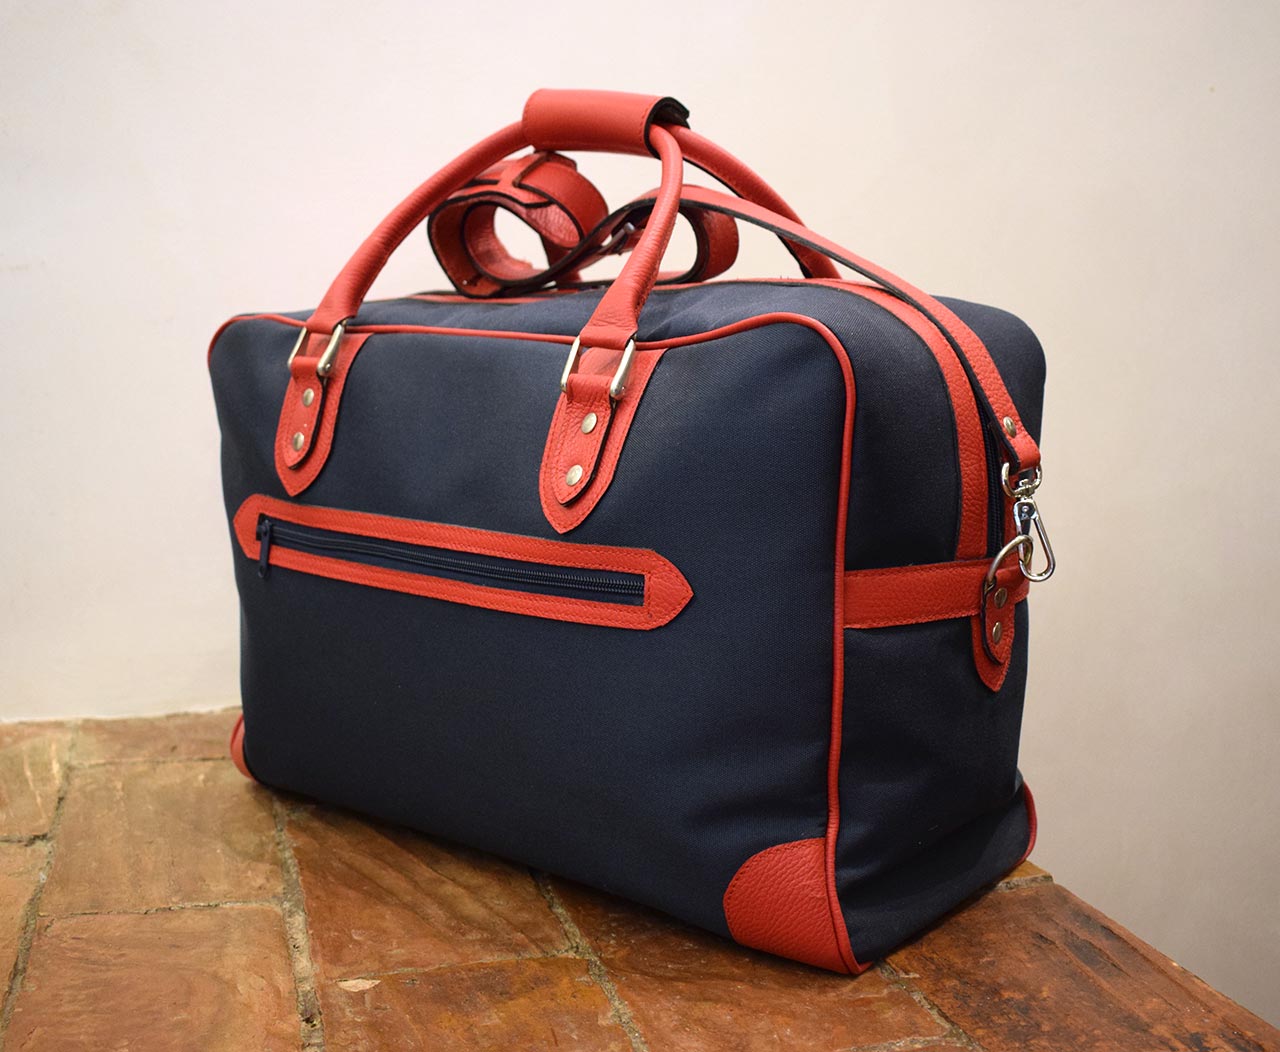 Handmade travel bag, waterproof canvas and leather - Mancini Leather